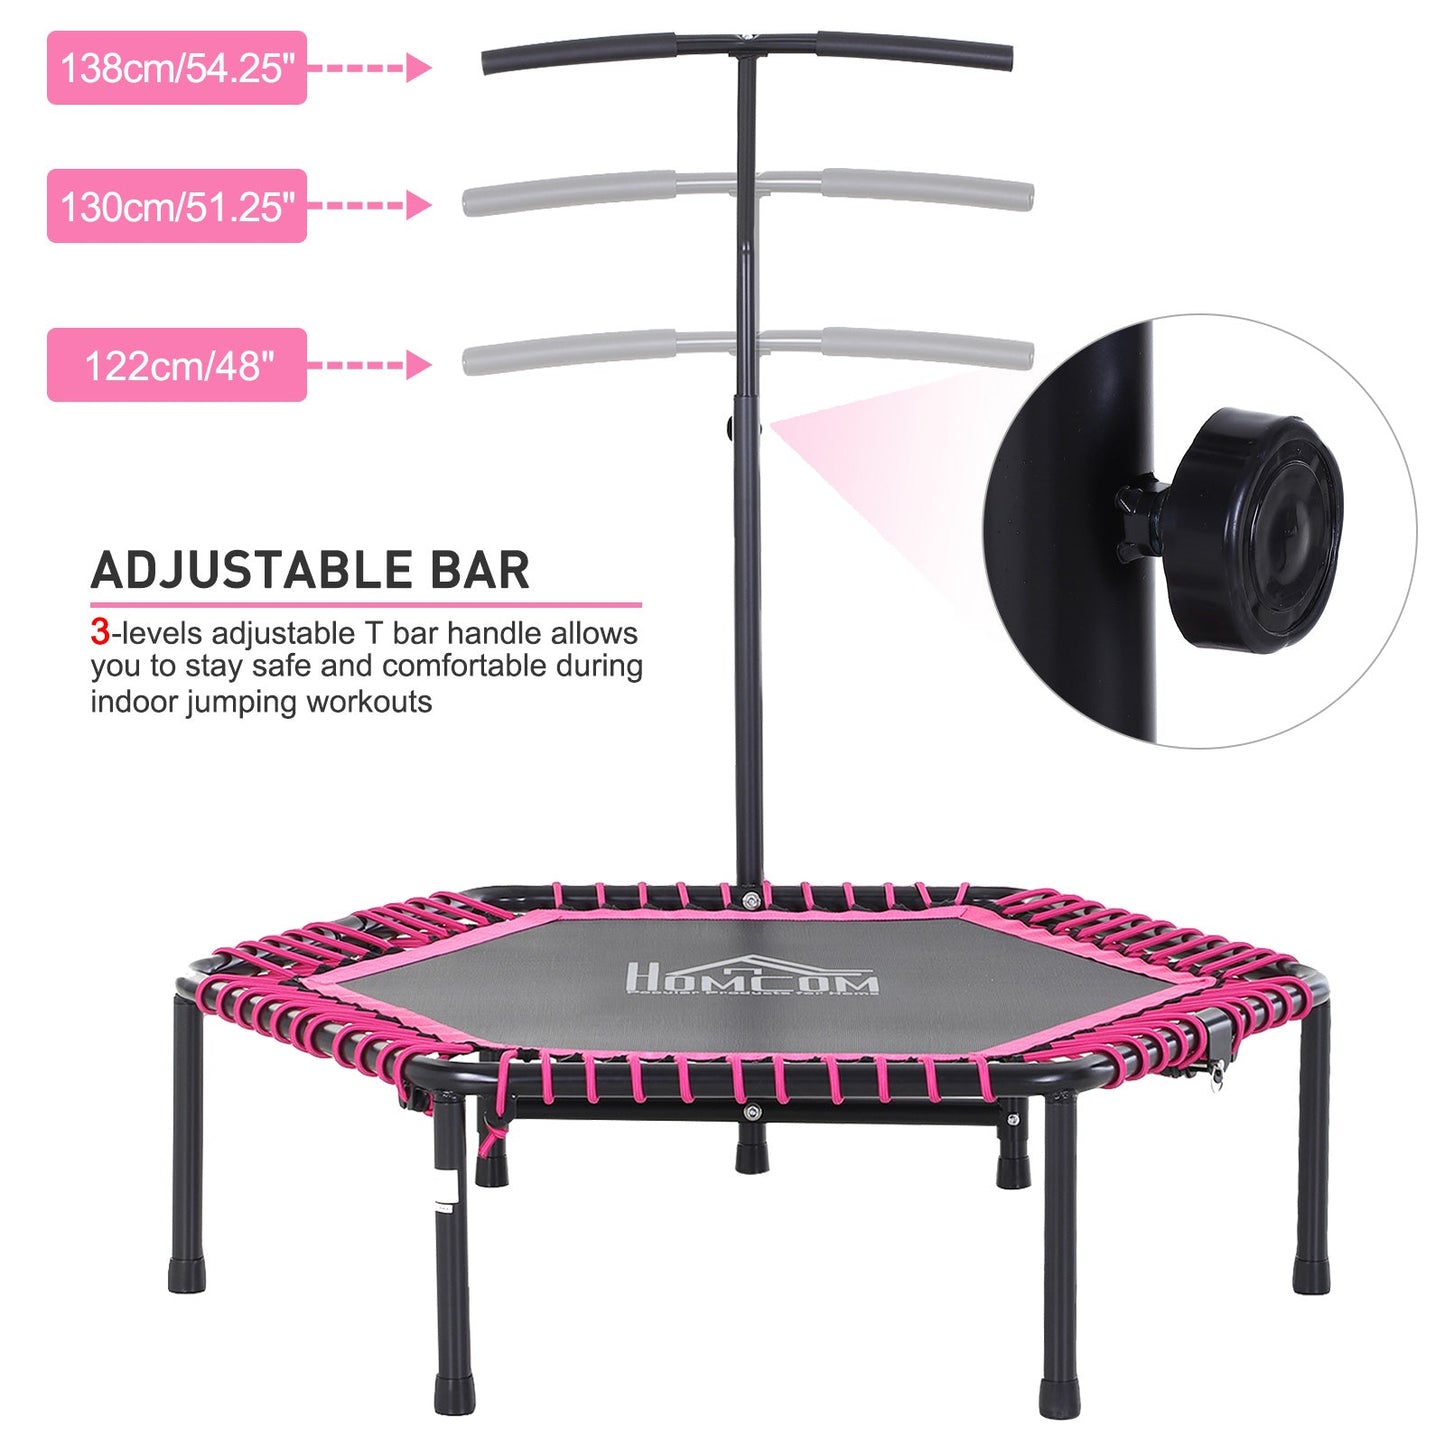 48" Adult Hexagon Rebounder Trampoline Fitness Bungee Jumping Cardio Trainer Outdoor Bouncer Jumper Adjustable Bar Pink at Gallery Canada